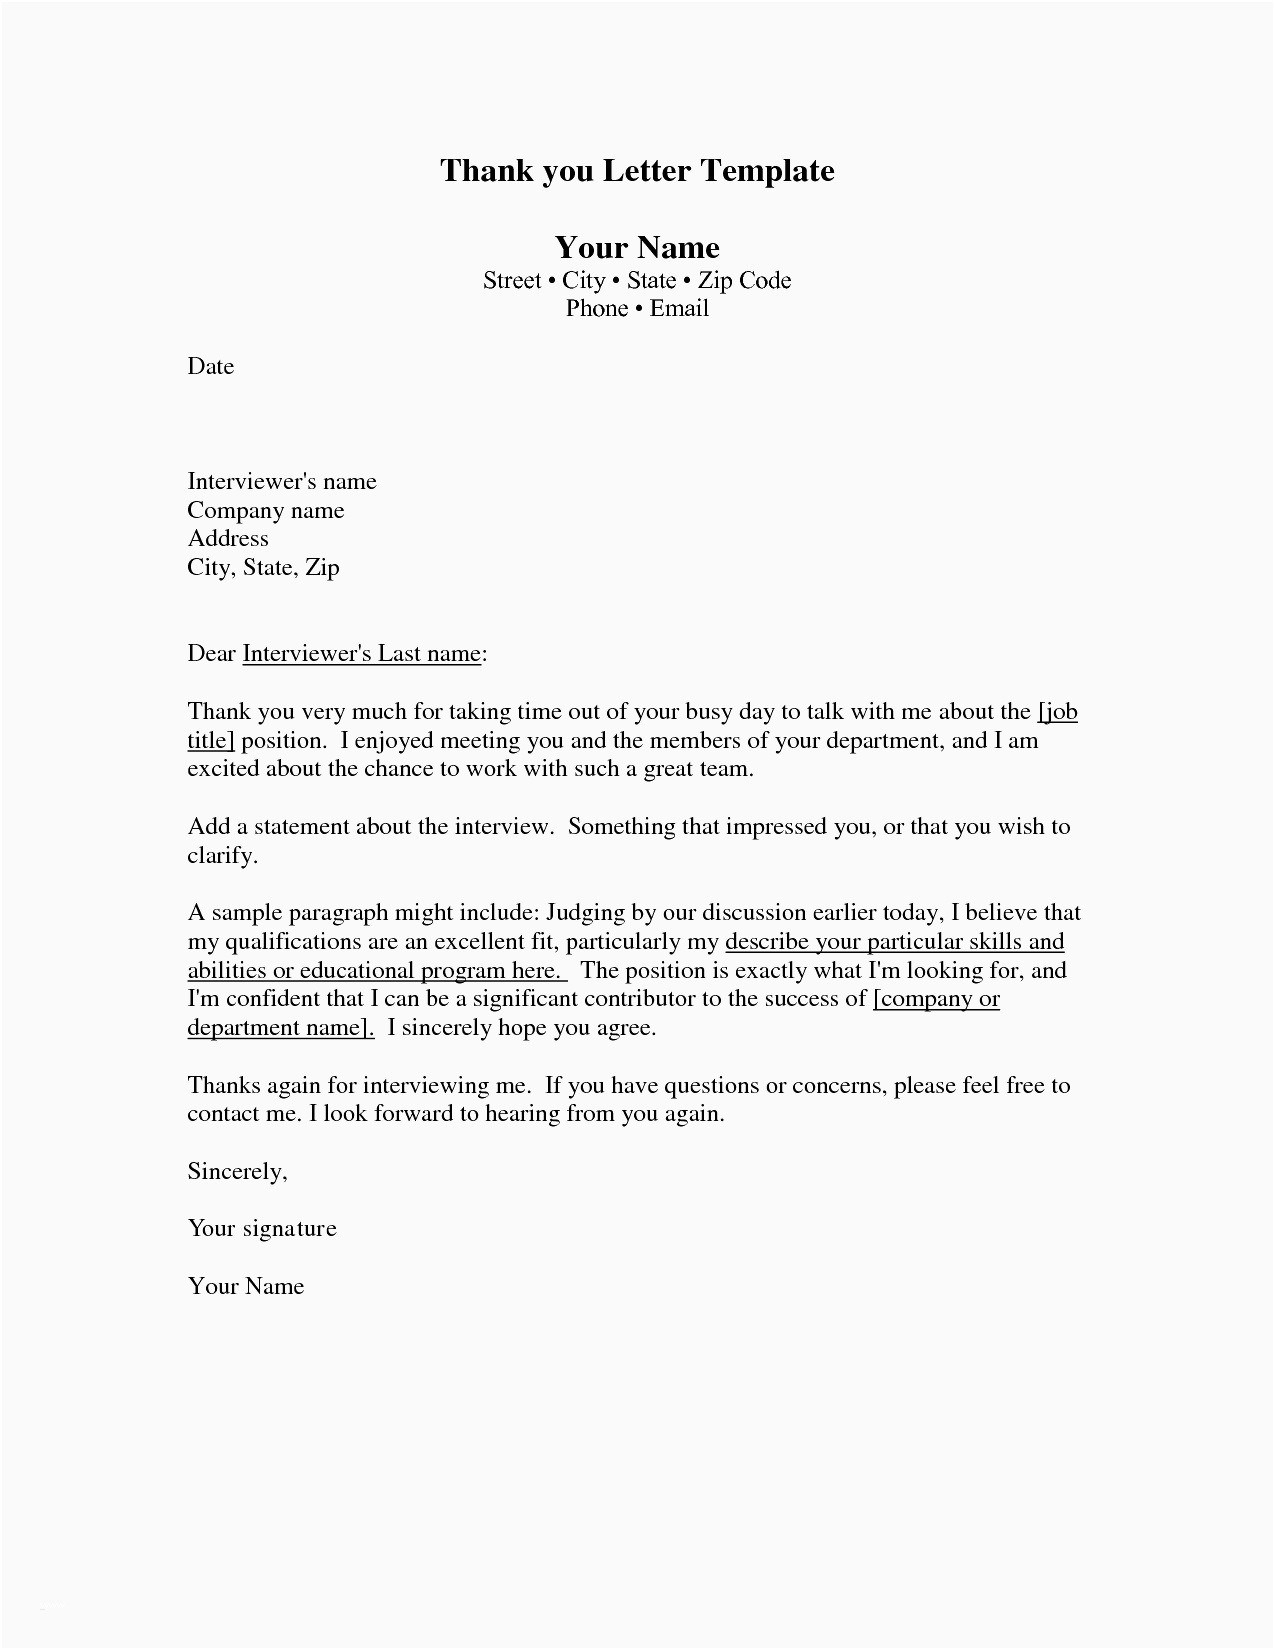 Customer Thank You Letter Template - Luxury Thank You Cards for Customers Tellmeladwp